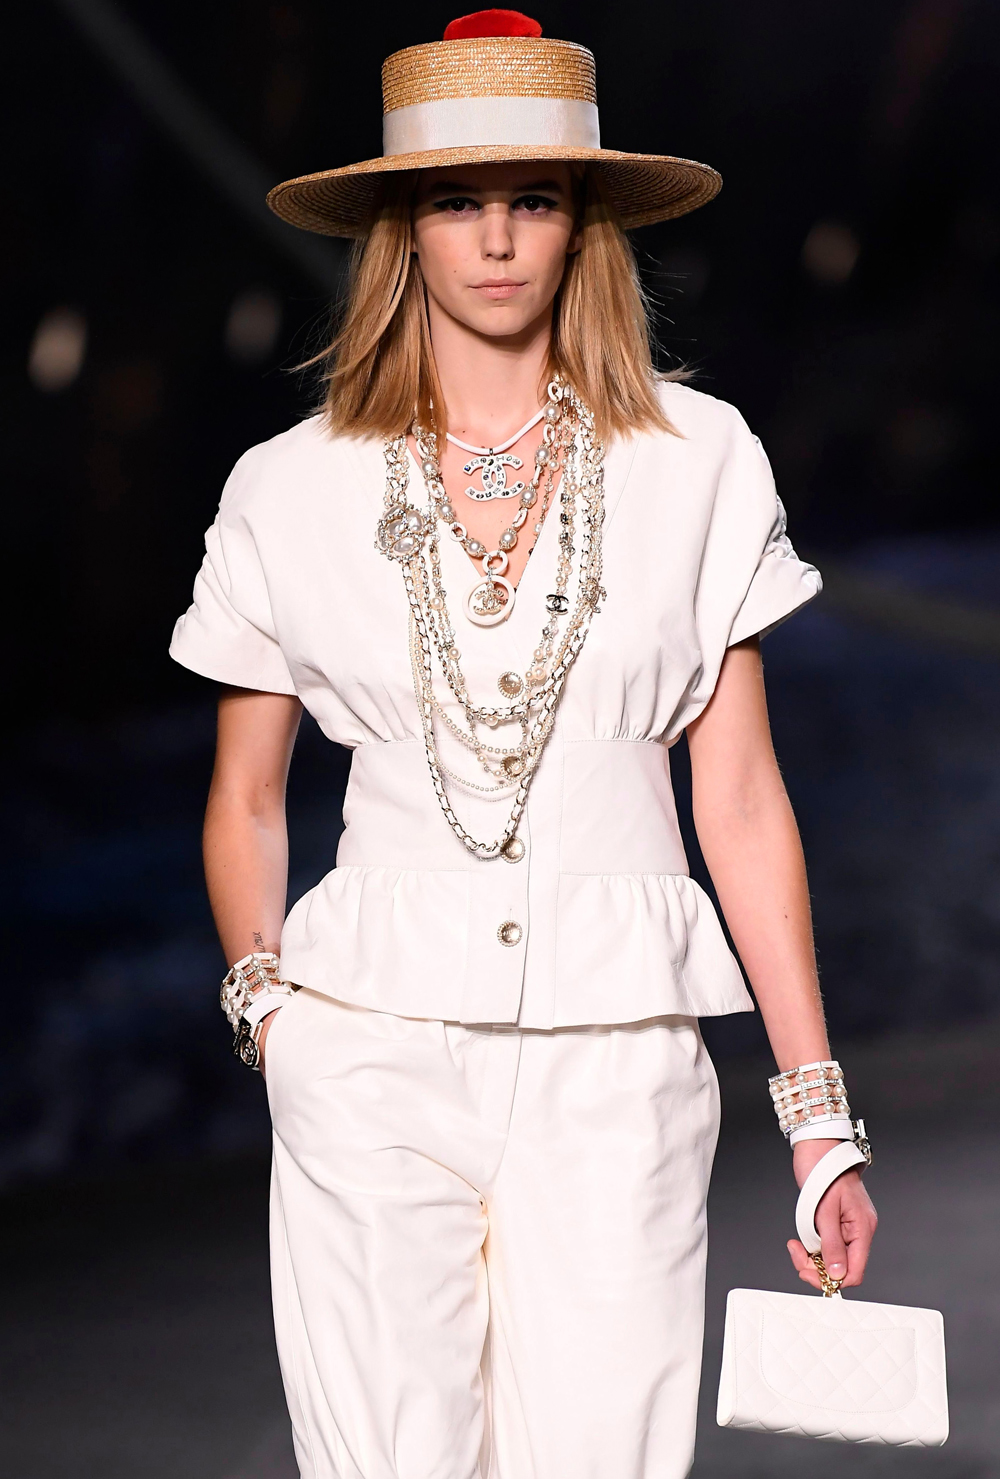 Chanel’s 2019 Cruise Show was Pure Nautical Magic | About Her